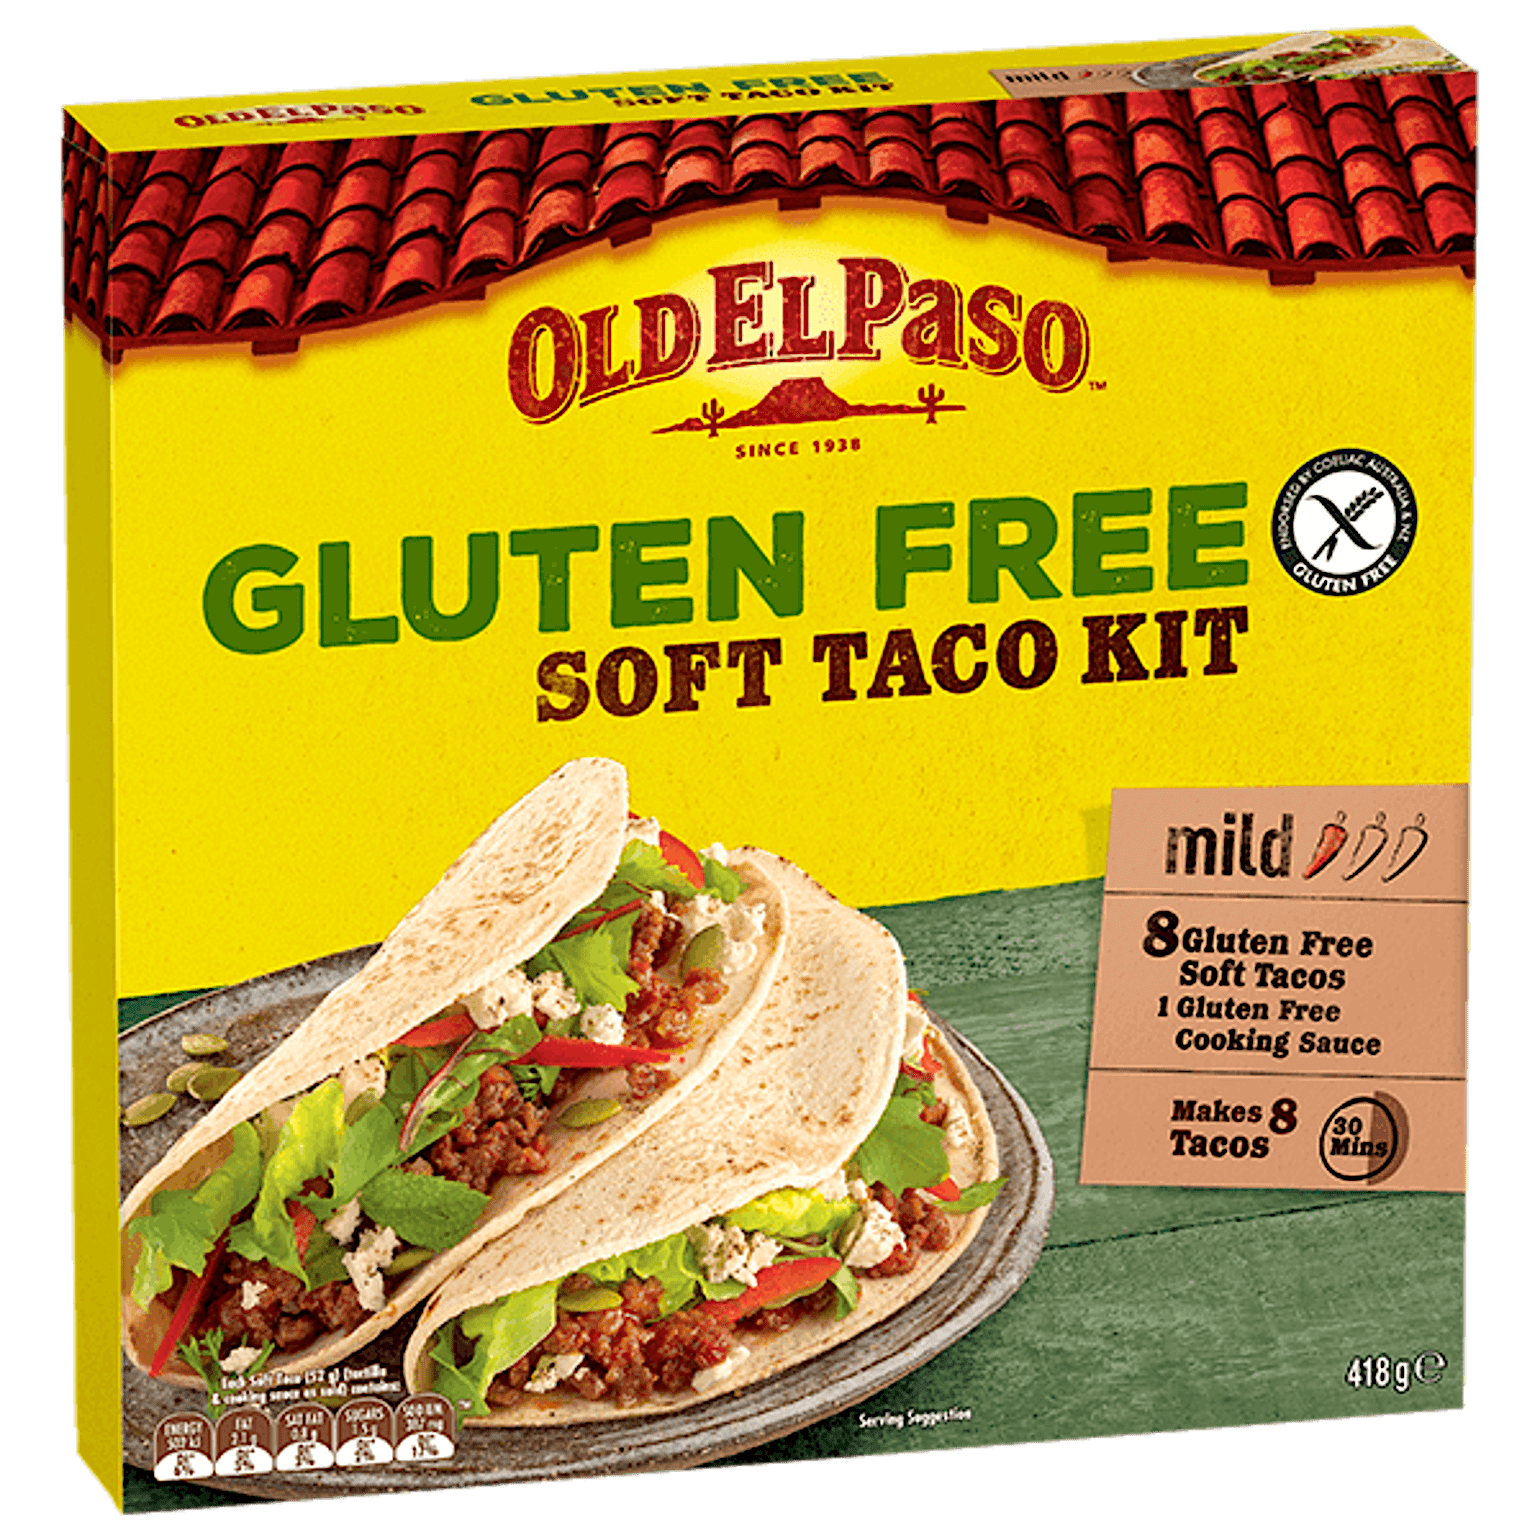 a pack of Old El Paso's gluten free mild soft taco kit containing soft tacos & cooking sauce (418g)